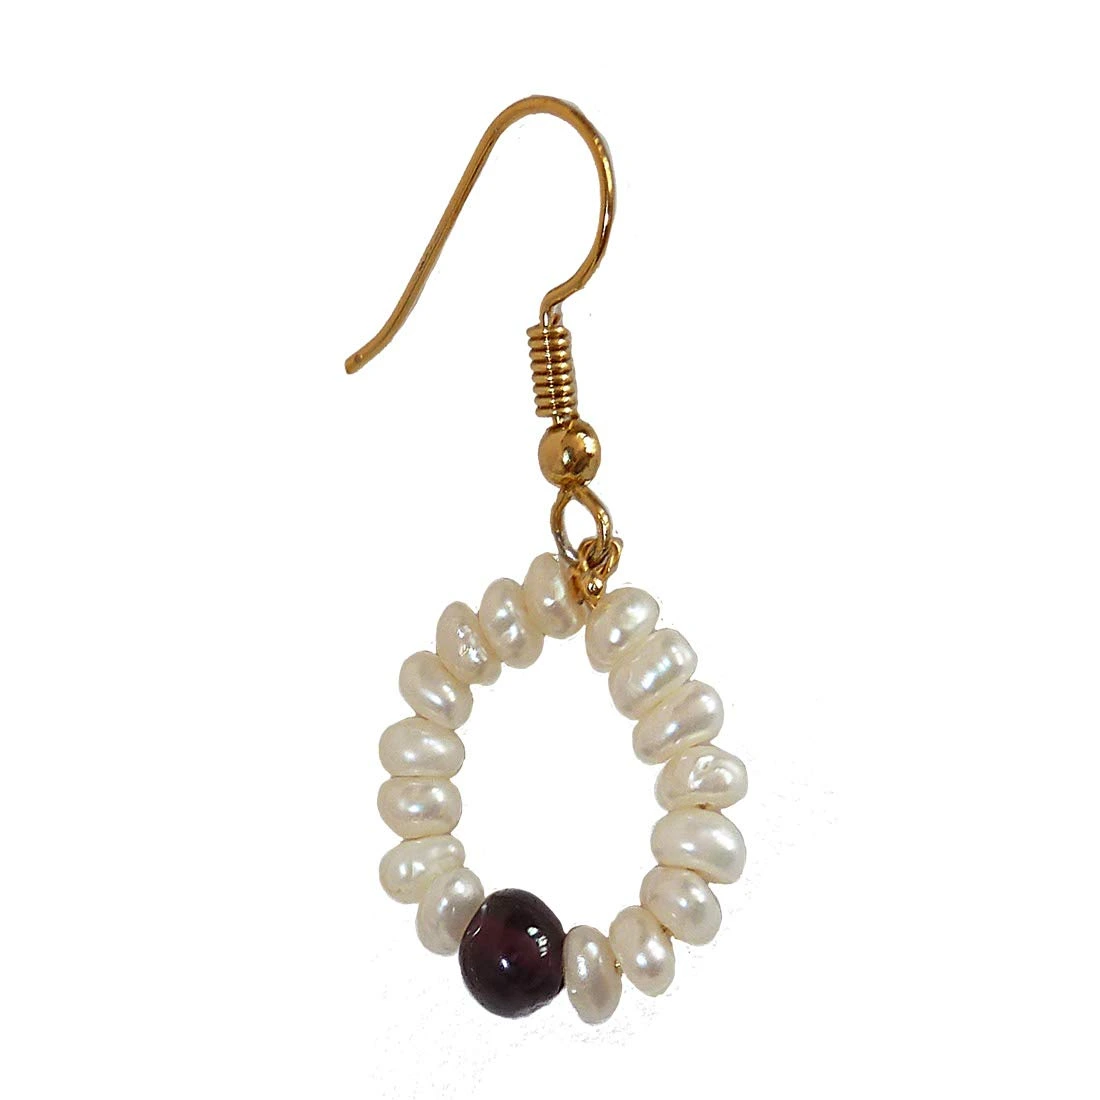 Dangling Circular Garnet Beads, Freshwater Pearl and Gold Plated Wire Style Earrings(SE381)